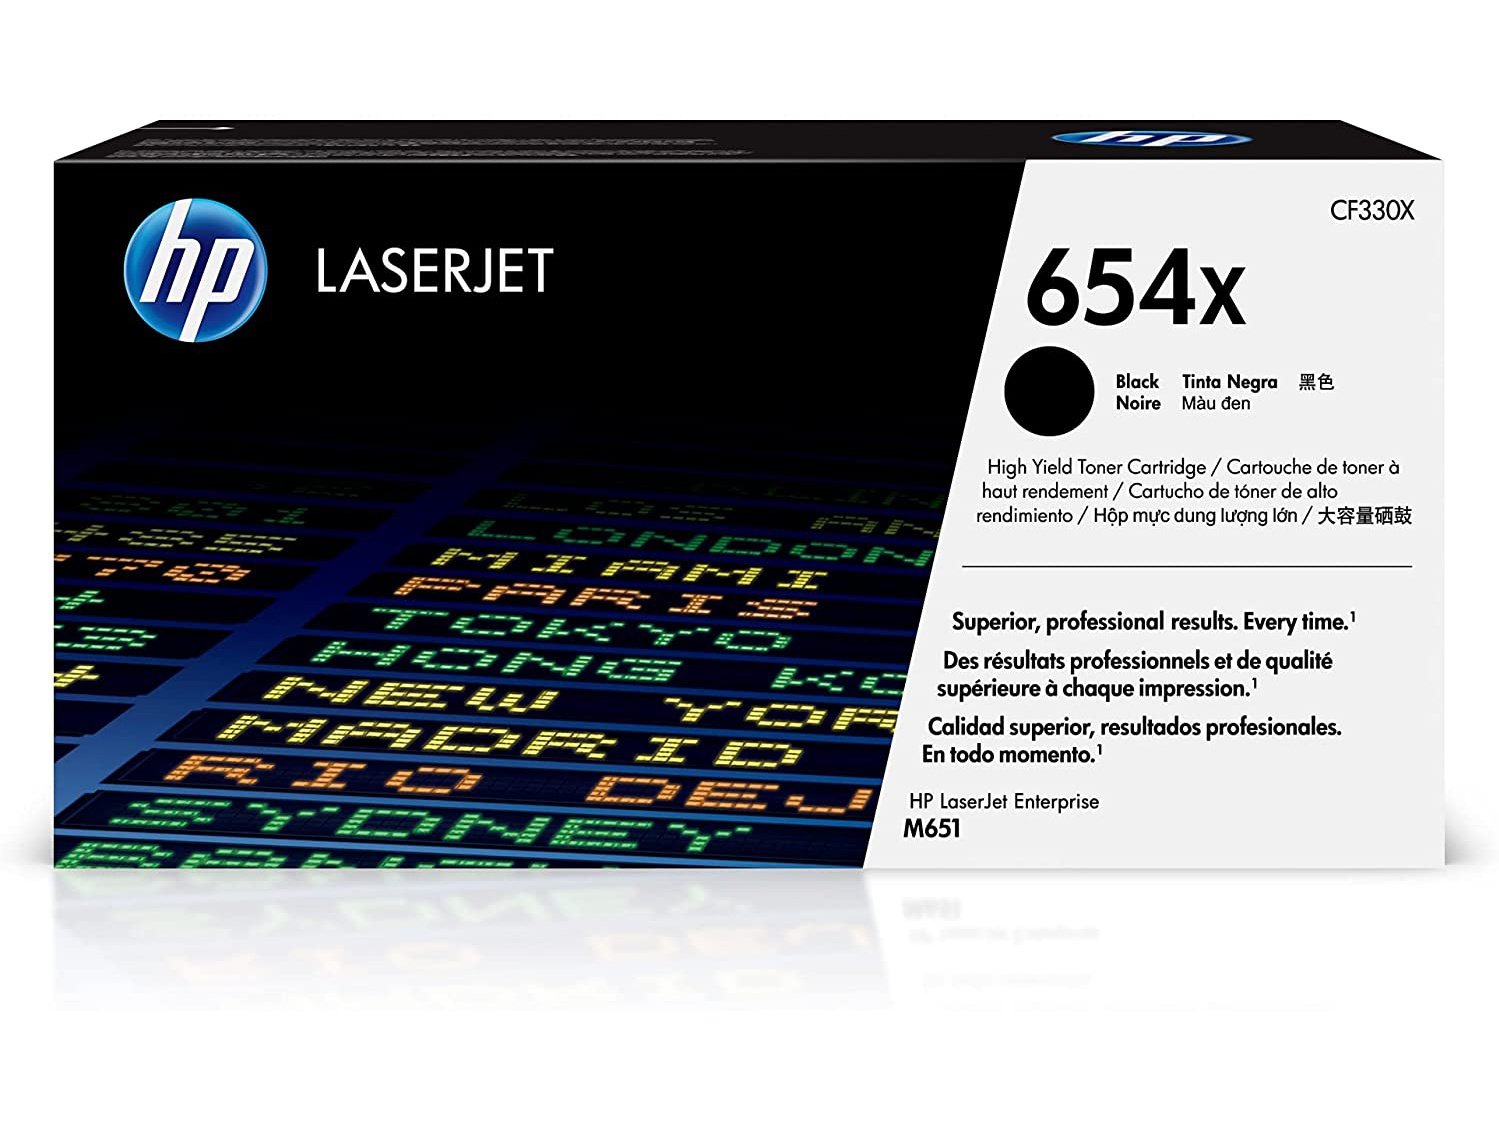 ICU Compatible/ OEM Get HP ICU CF330X Yields 20500 Pages Compatible CF330X Toner Cartridge Black - 654X - High Yield - Ink Cartridges USA